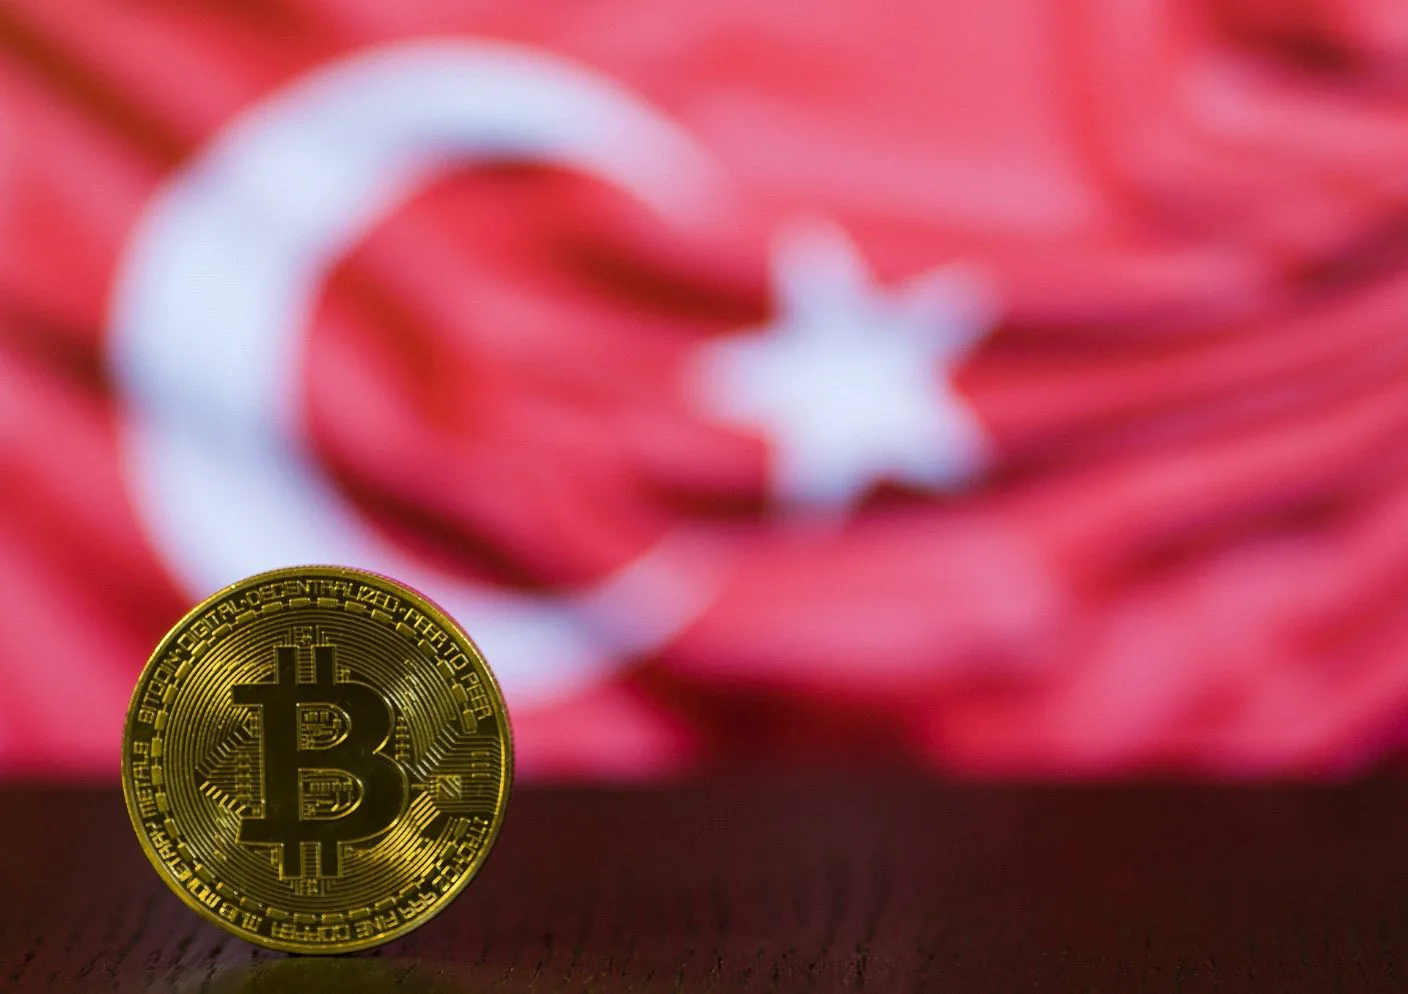 Turkish President Recep Tayyip Erdoğan instructs the ruling party to explore metaverse and crypto